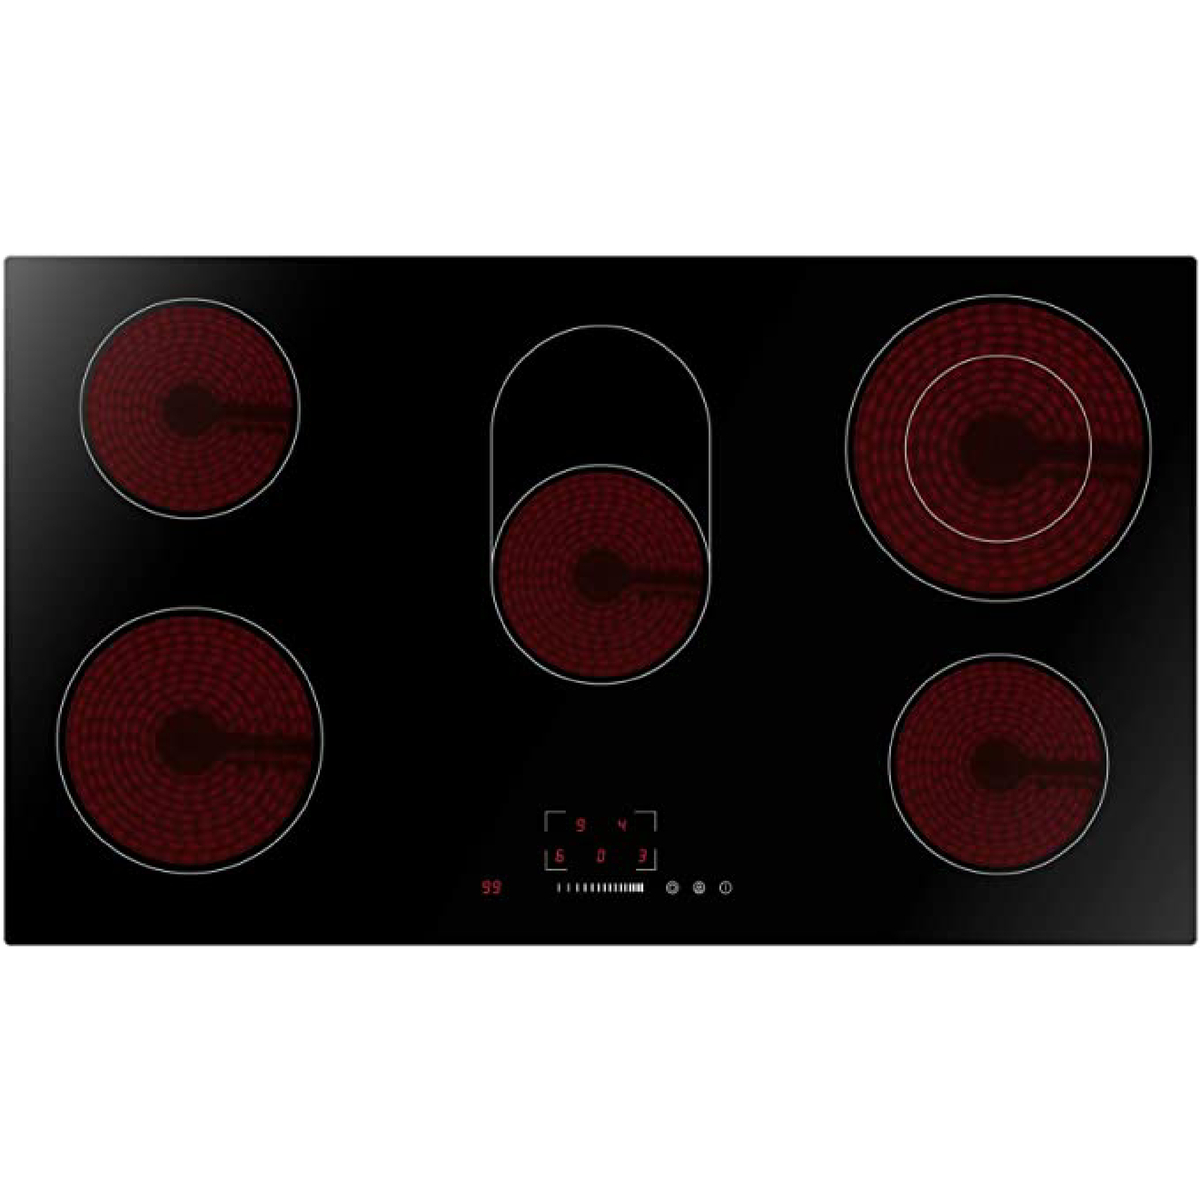 Midea Built-in Ceramic Electric Hob With 5 Burners, 90 x 52 cm, Black, MCHV848